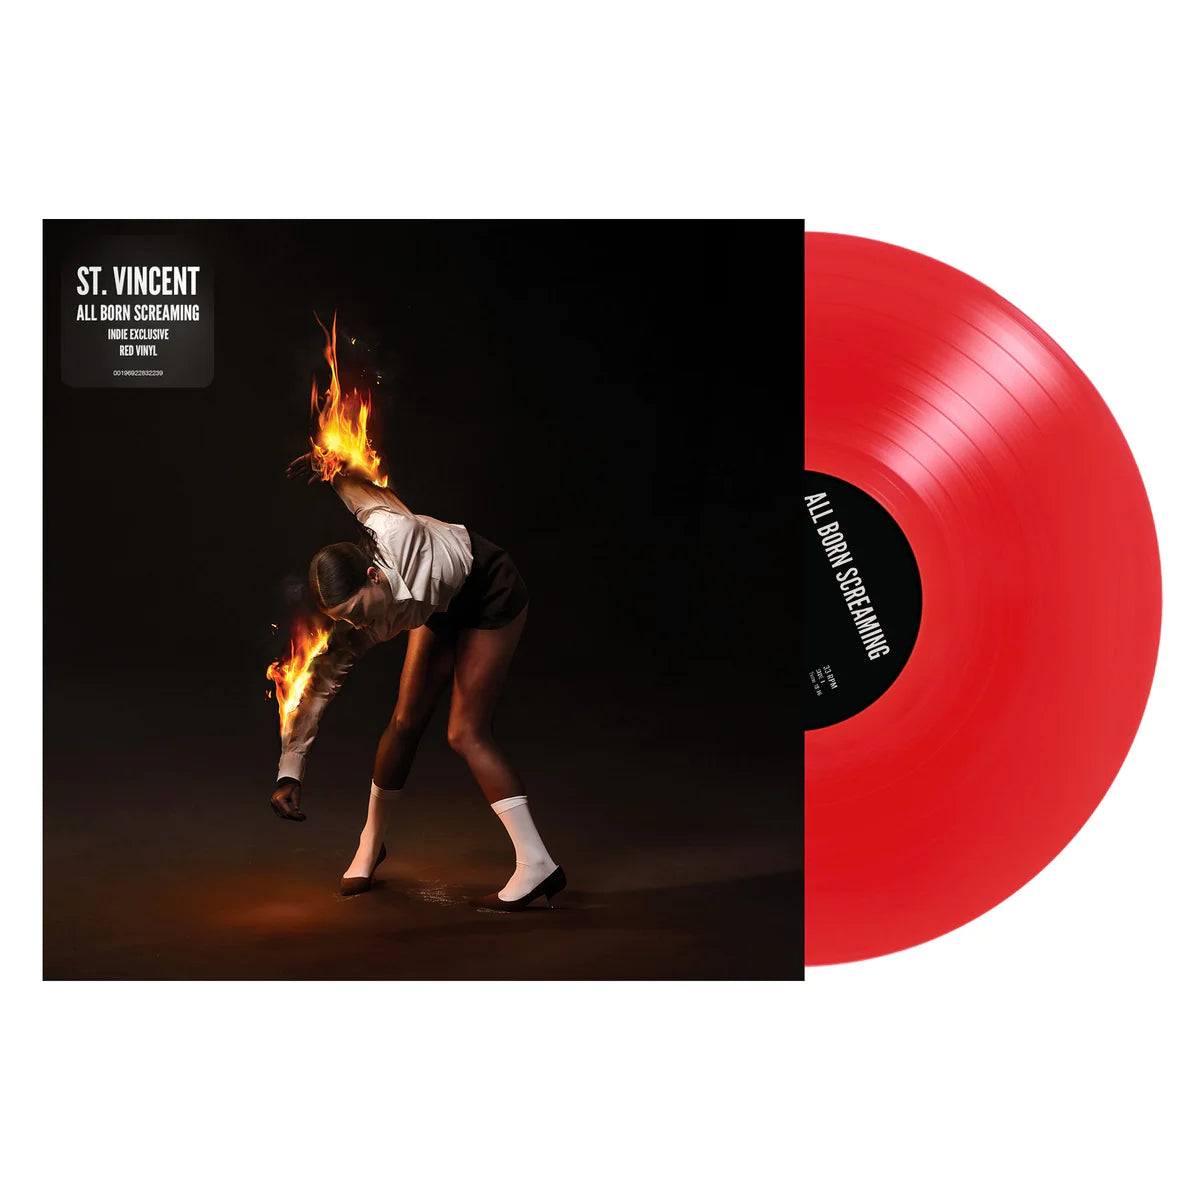 St. Vincent - All Born Screaming LP (Indie Exclusive Red Vinyl)